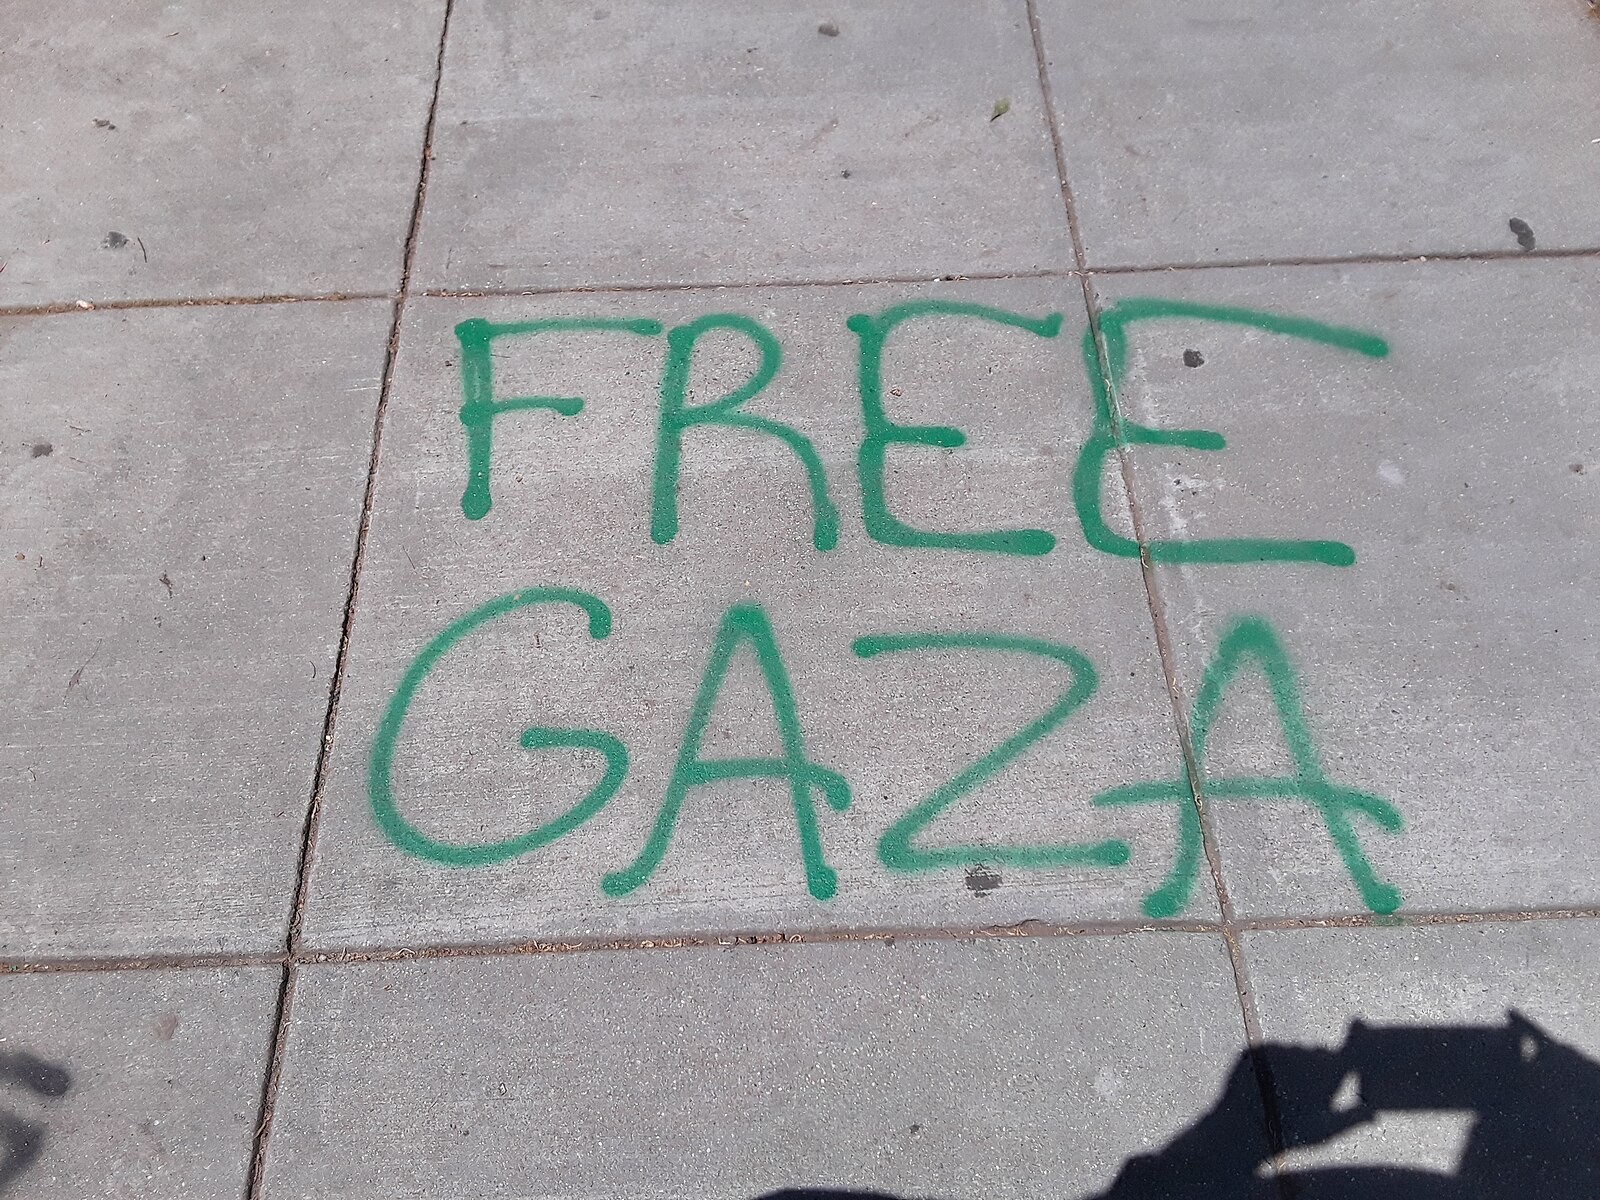 "FREE GAZA" spray painted in capital letters on a sidewalk